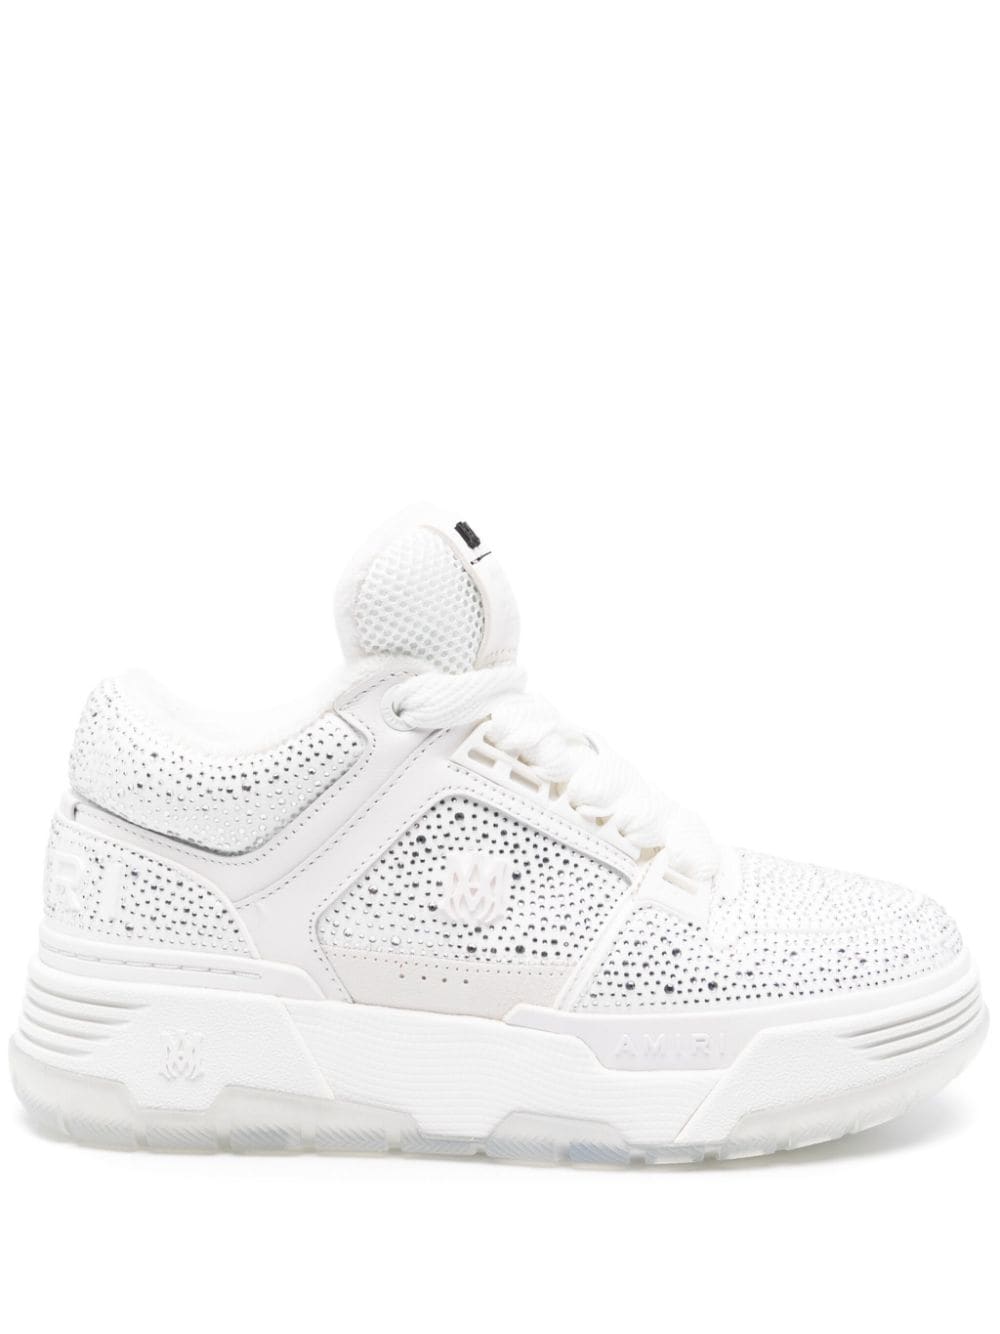 Amiri Crystal Ma-1 Leather Sneakers In White